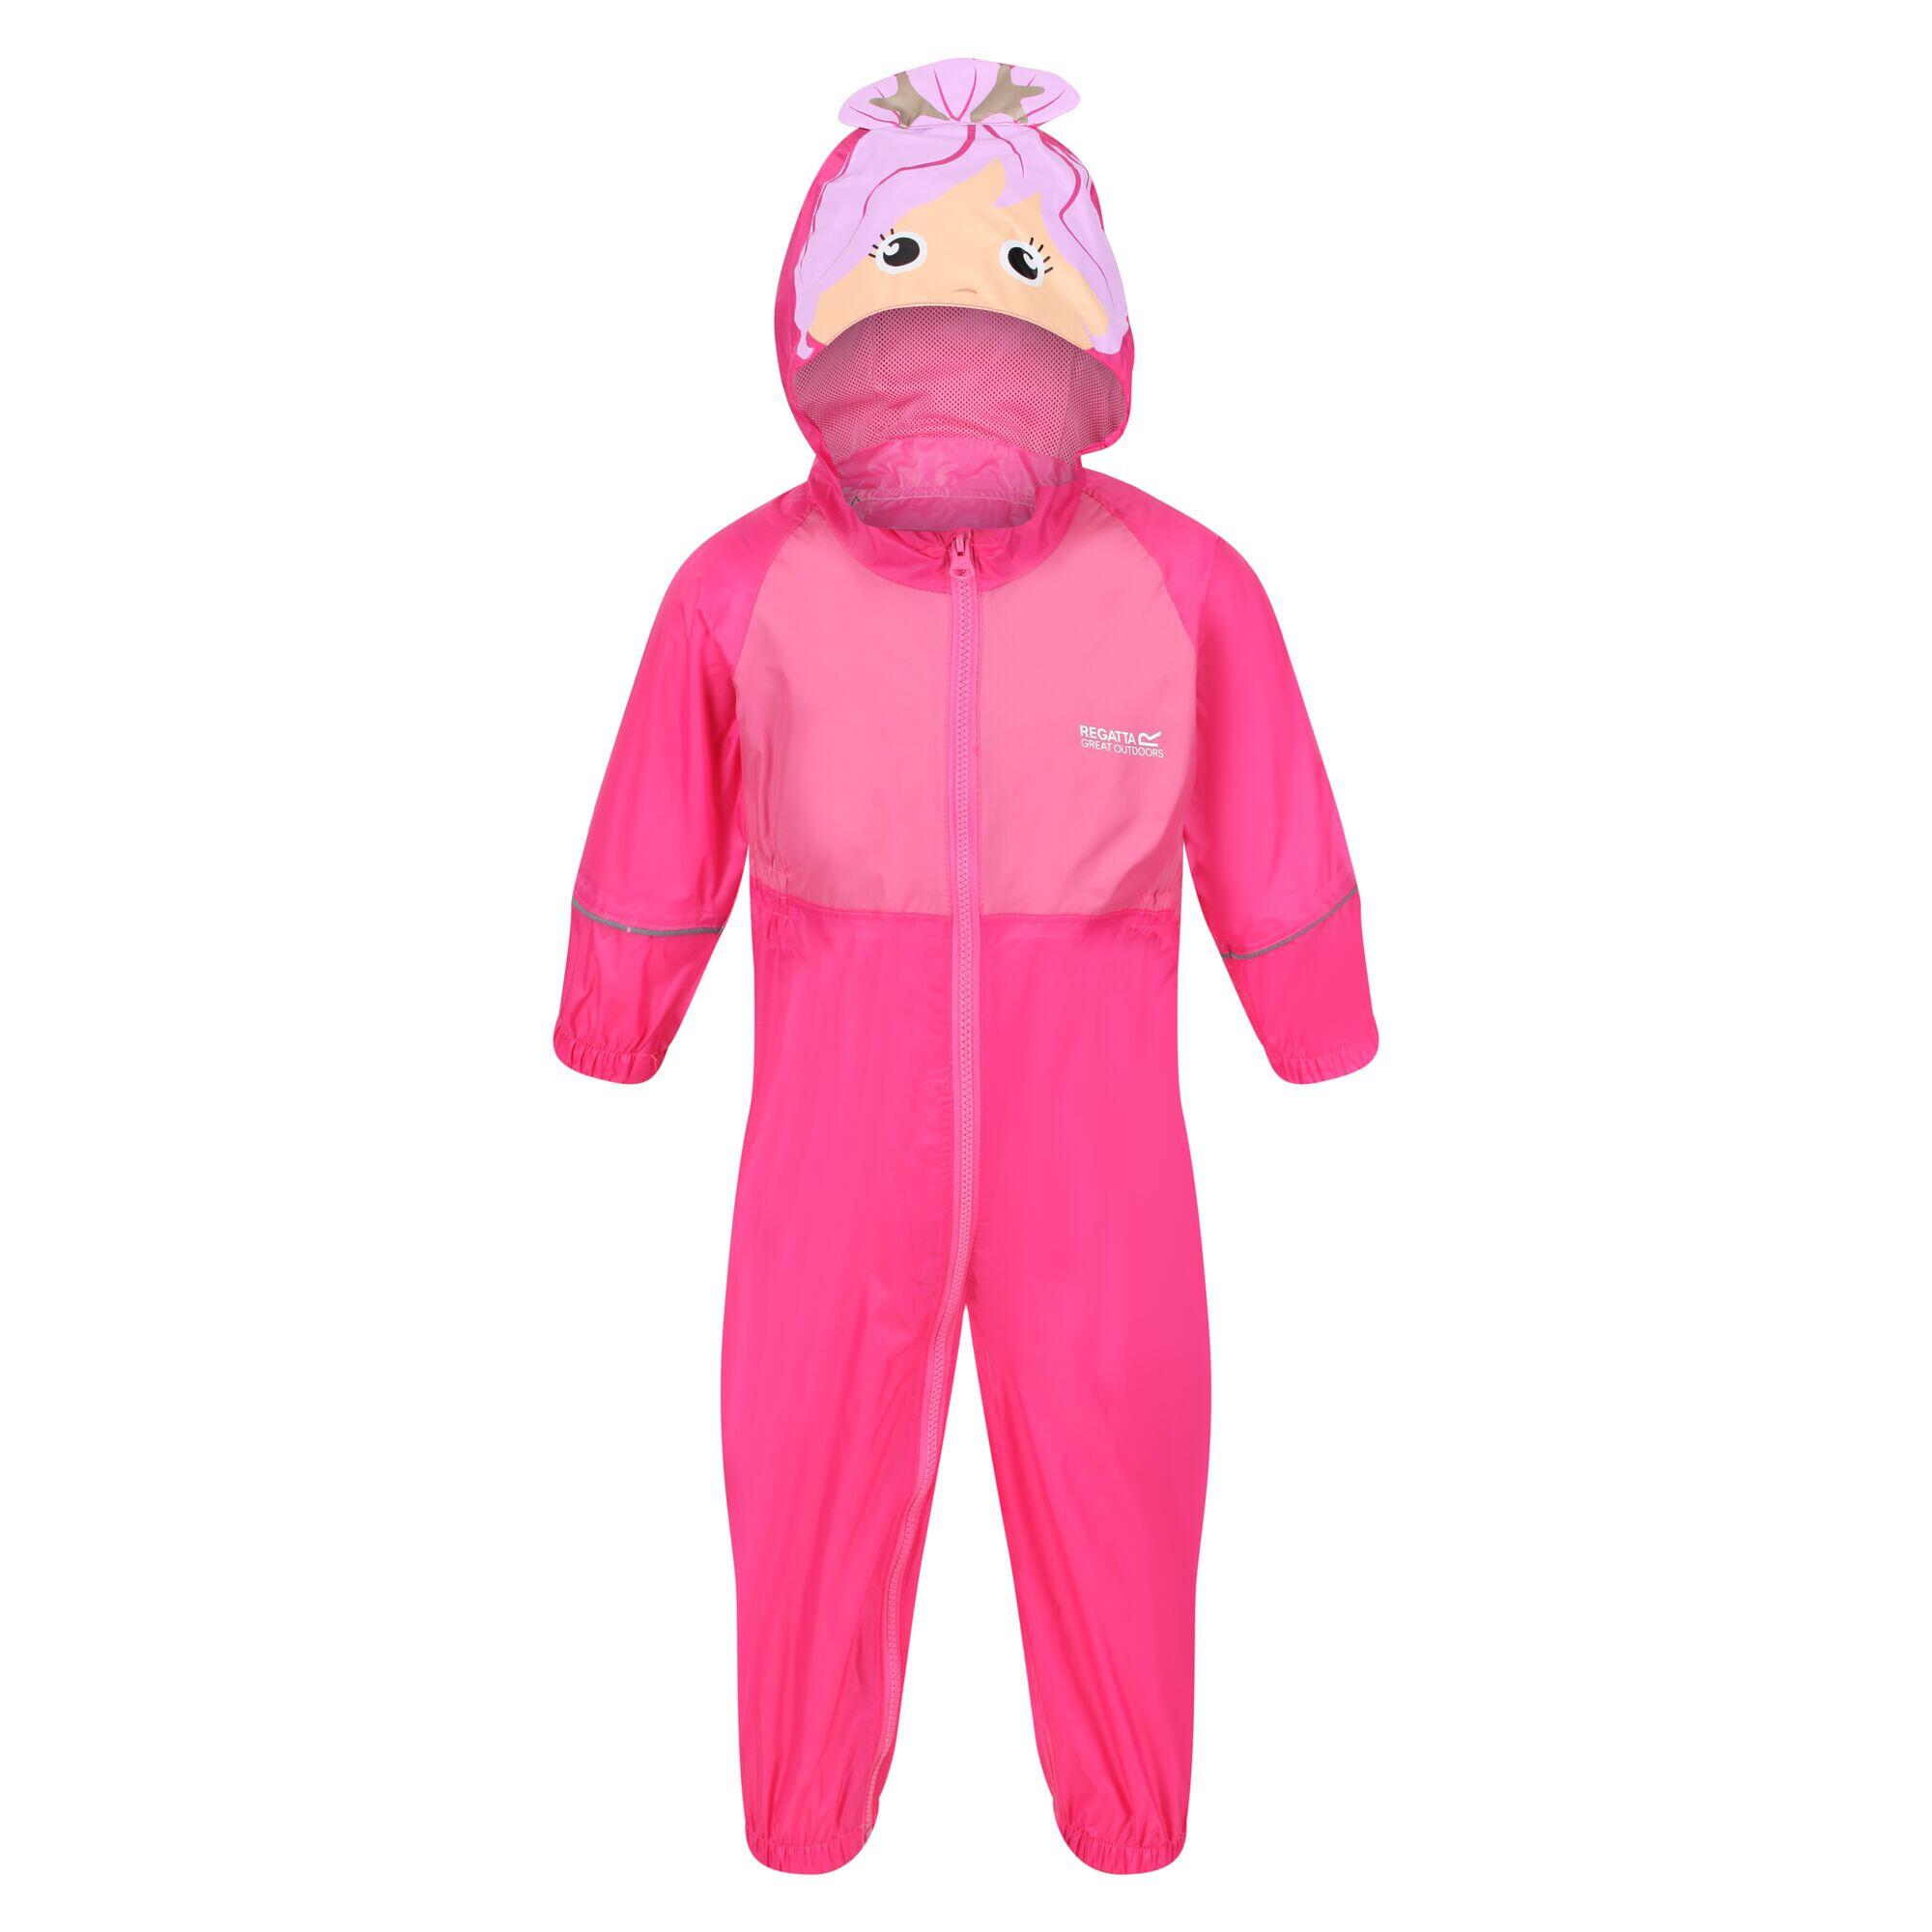 Charco Kids Hiking Hooded Puddle Suit - Pink Mermaid 3/4